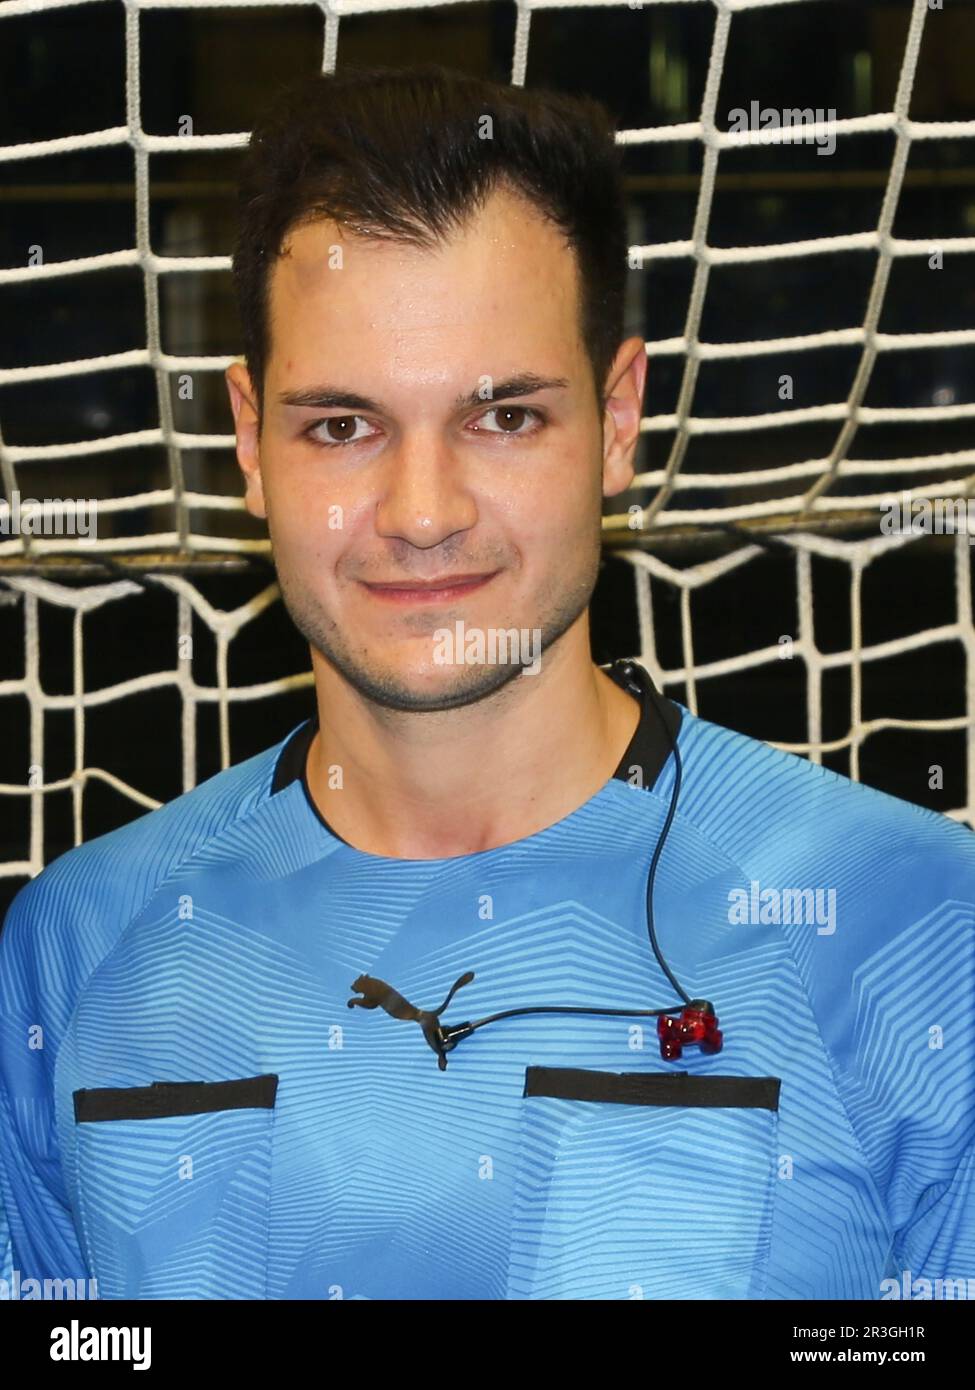 stock referee and images hi-res Alamy - 5 - photography Page Handball